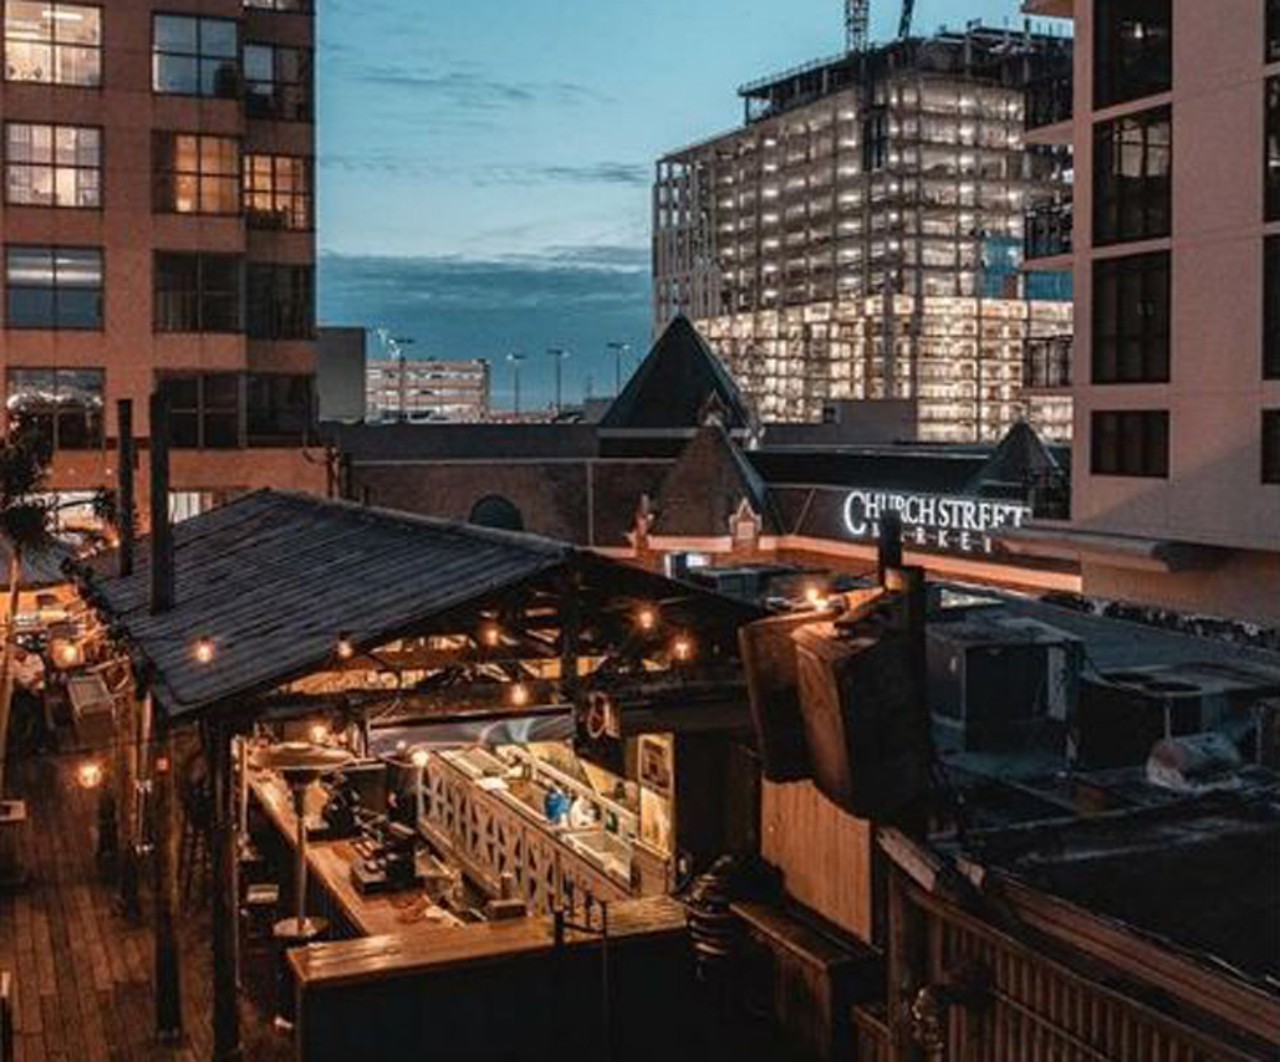 High Tide
33 W Church St., 407-649-4270
The rooftop bar at High Tide gives you a bird's-eye view of the City Beautiful. Check out their website for drink specials, suchy as Friday Happy Hour and Saturday Power Hour.
Photo via Church St. Bars/Instagram